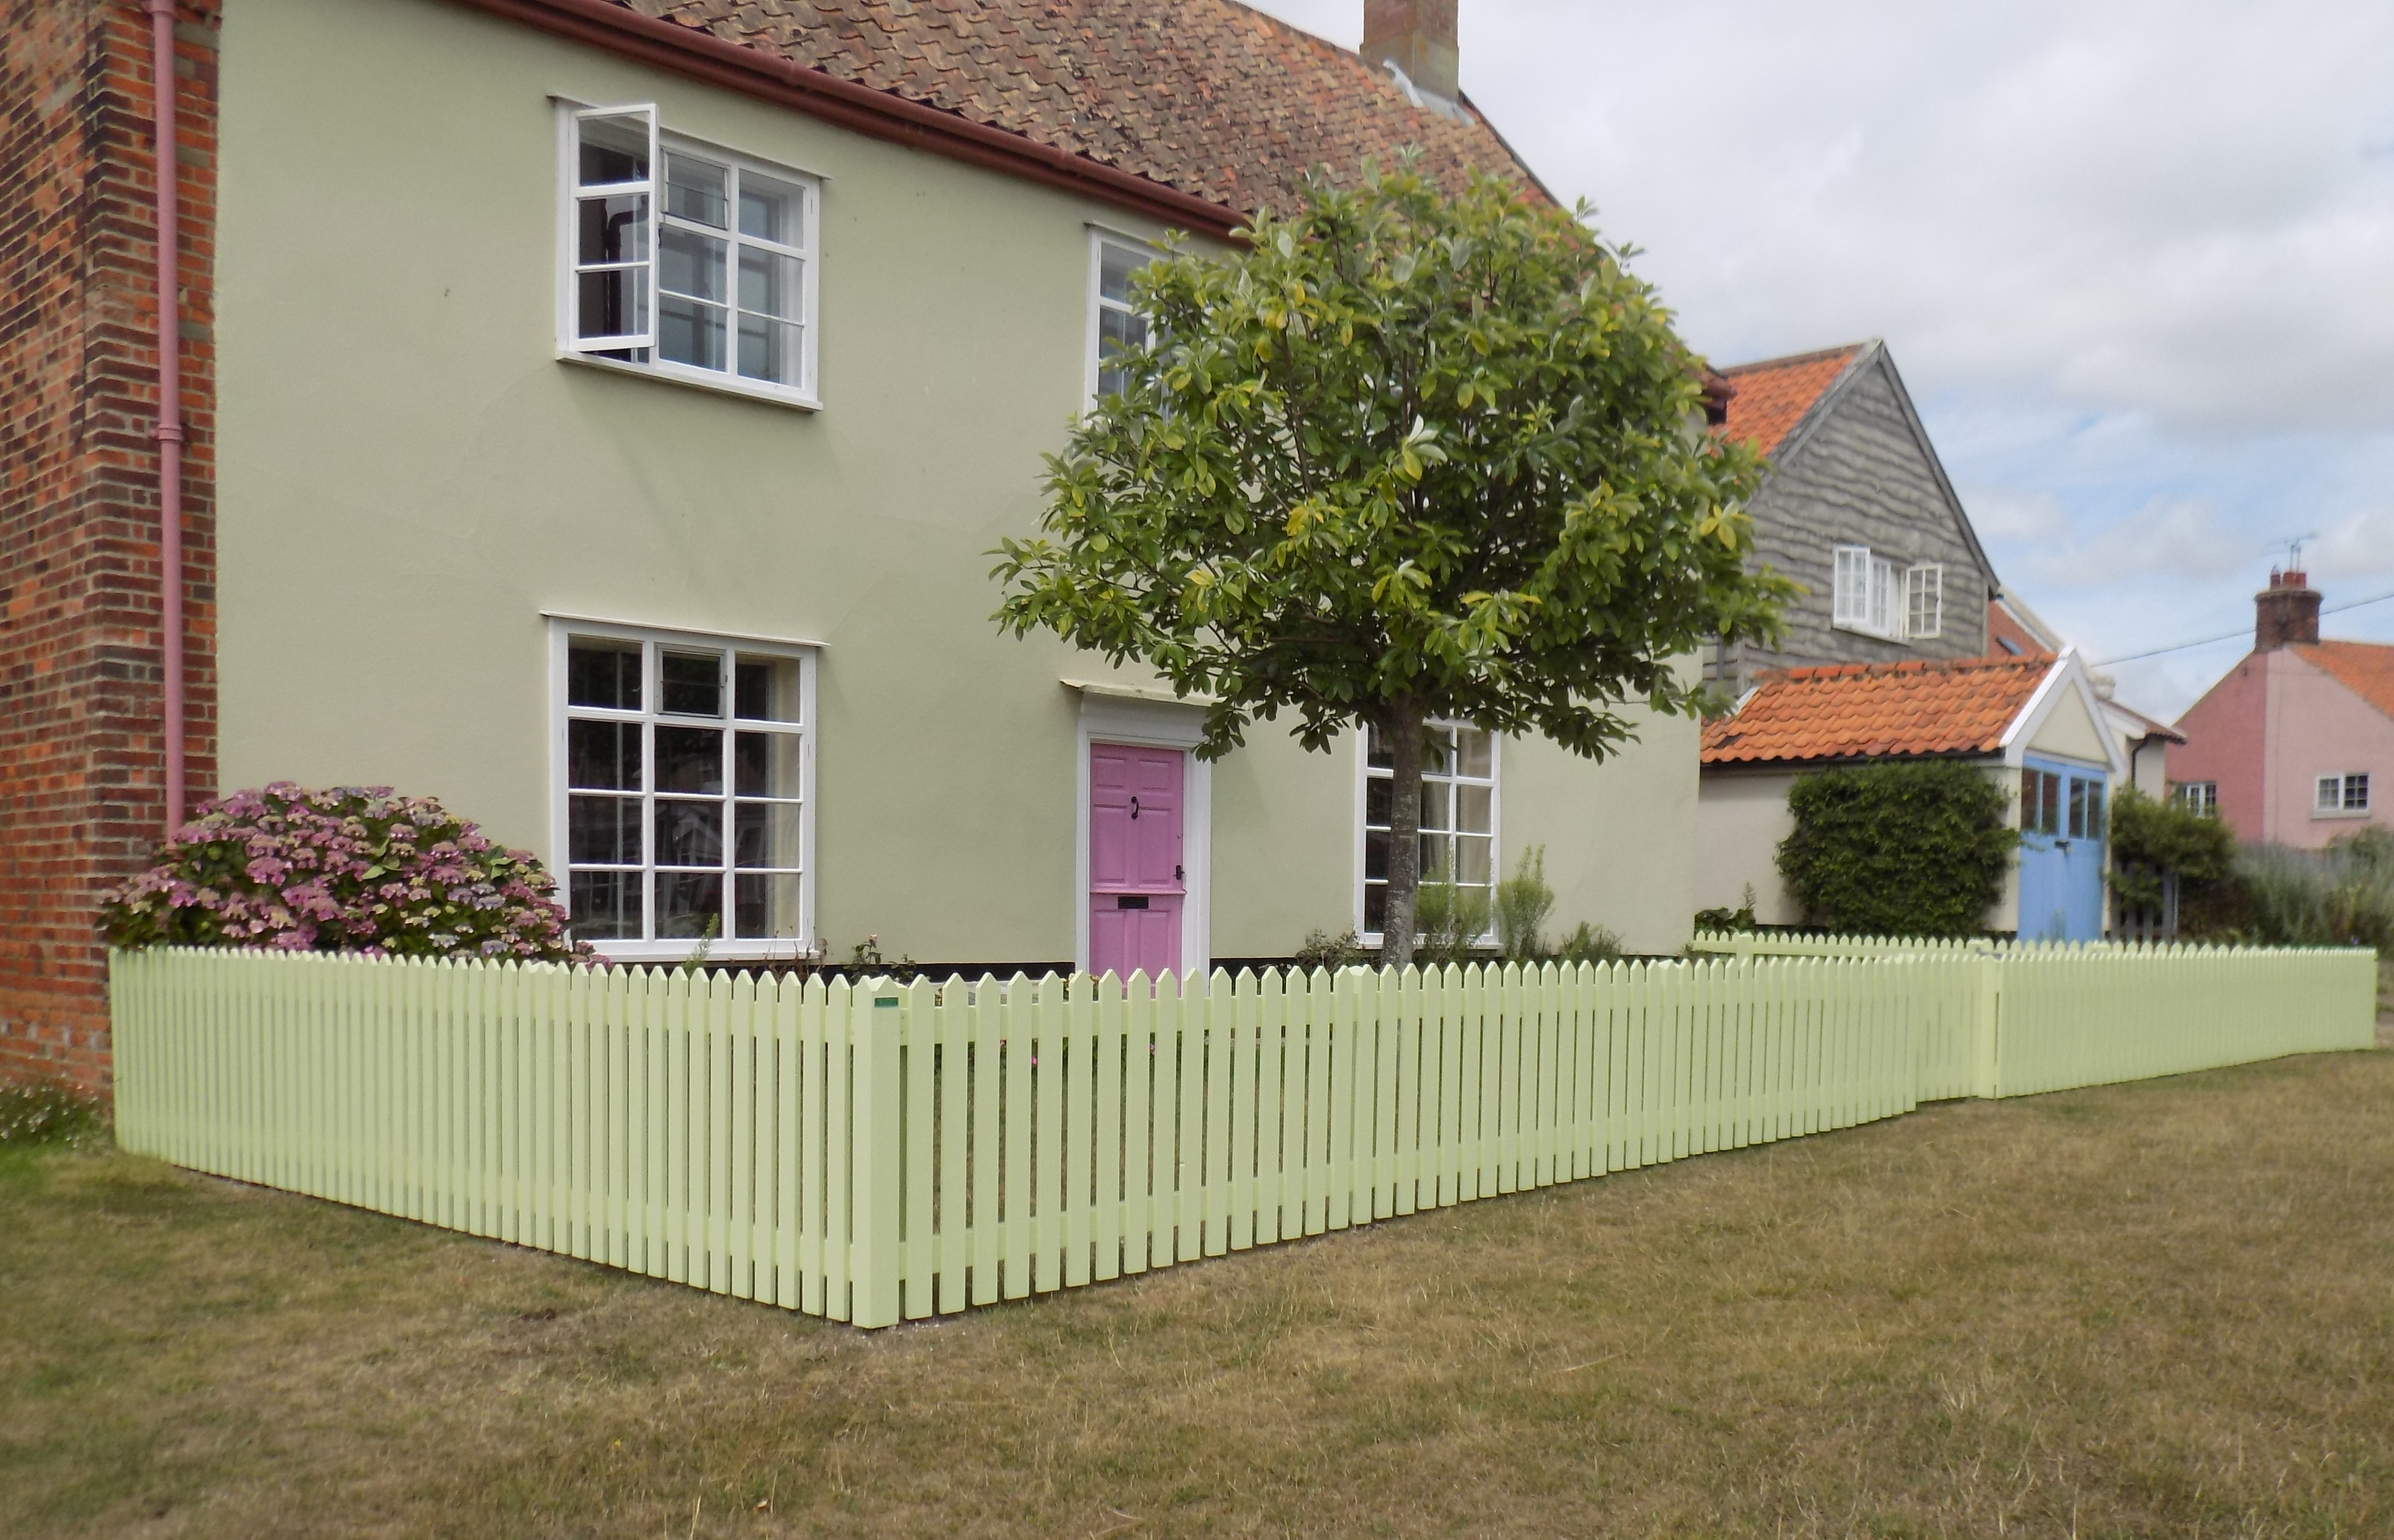 Picket fencing with pointed top finished in Cuprinol shades fresh pea